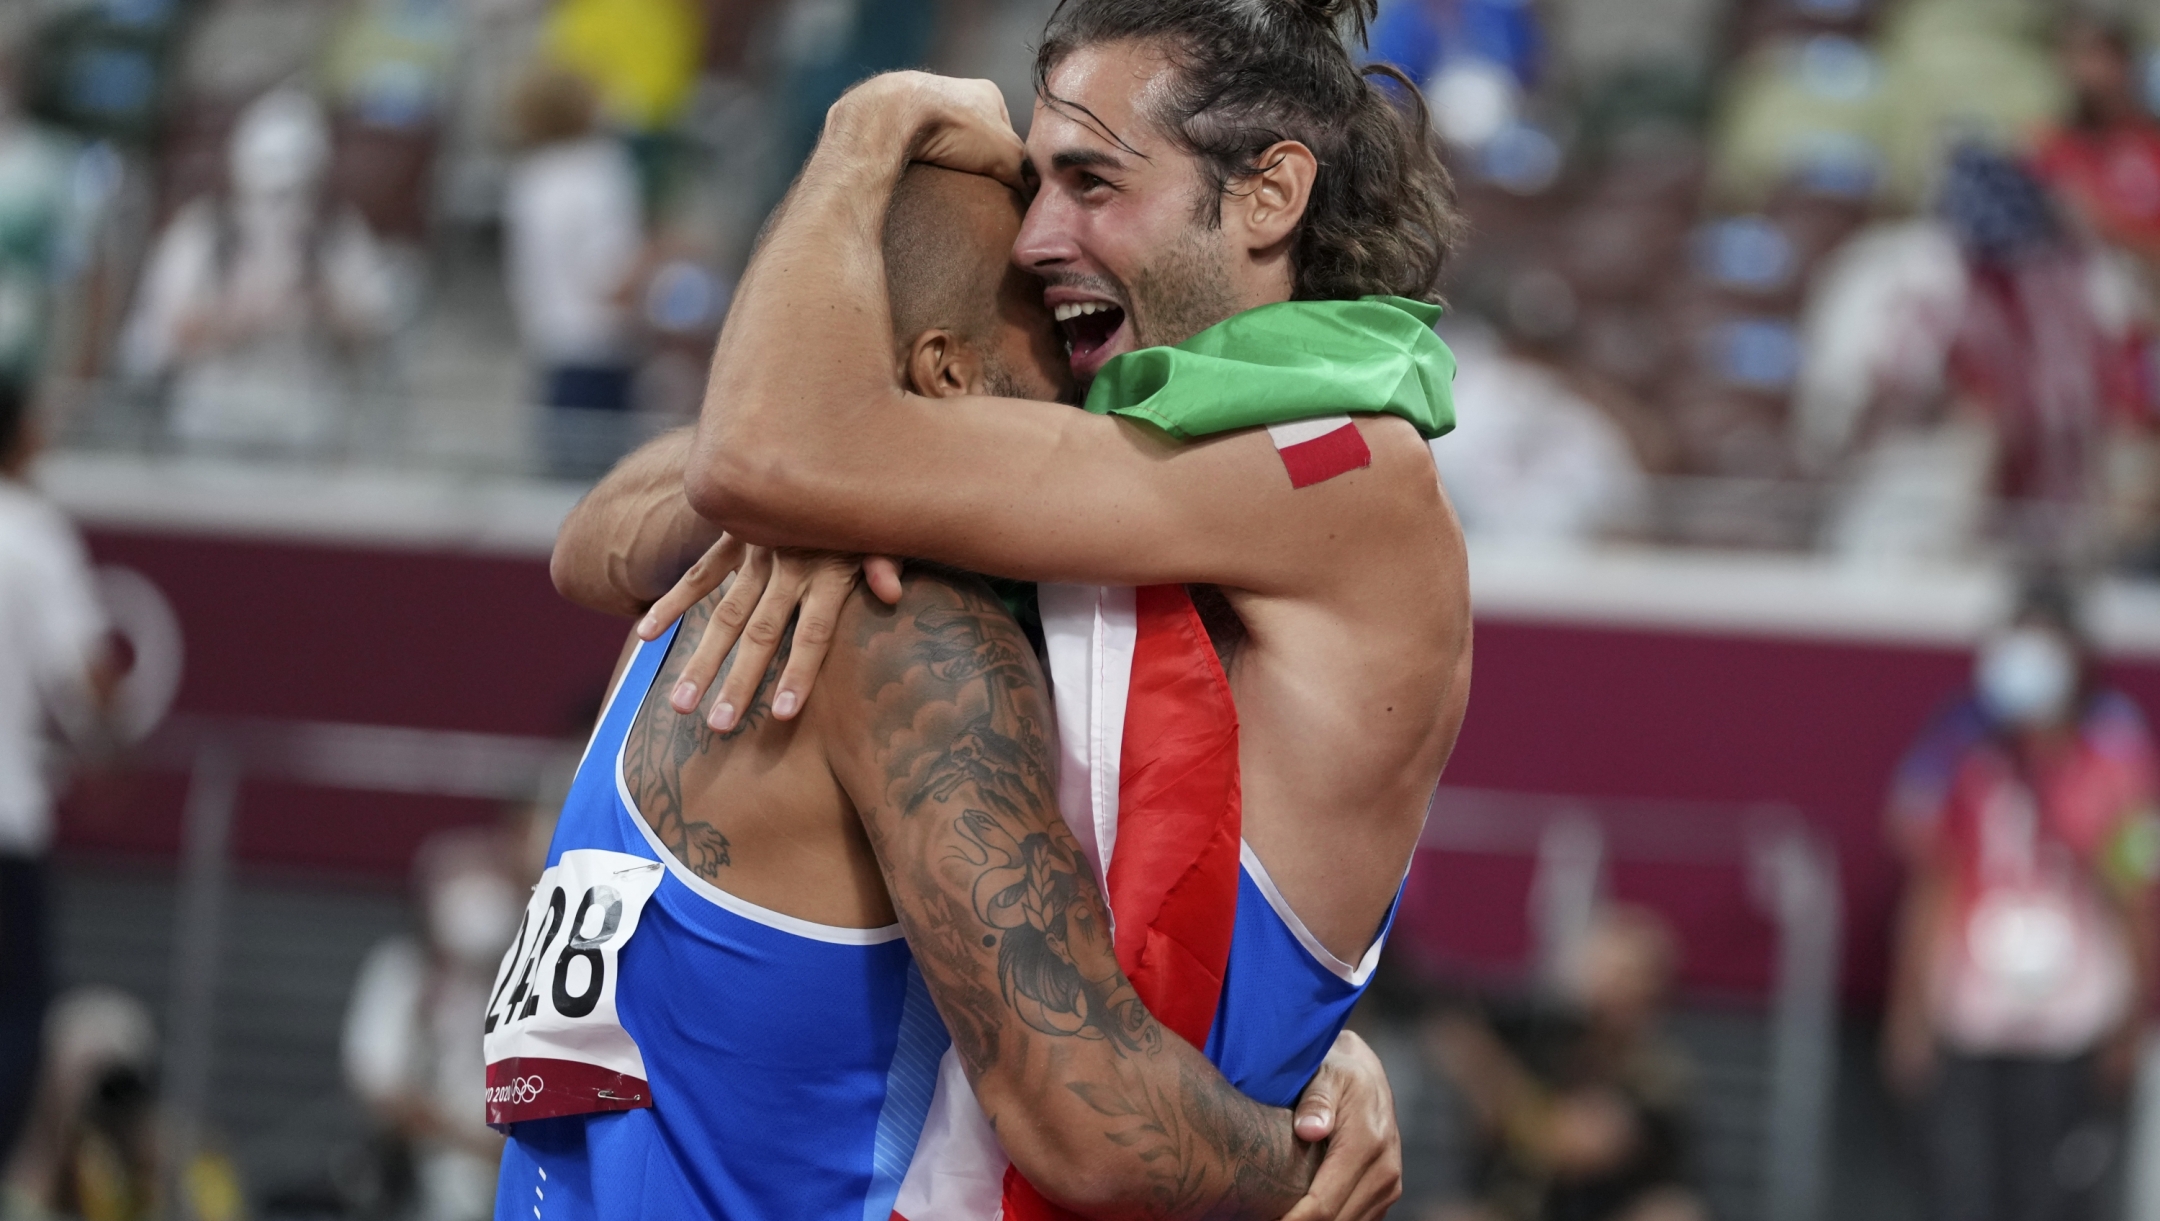 High jump gold medalist Gianmarco Tamberi, right, of Italy, congratulates compatriot Lamont Marcell Jacobs, after he won the final of the men's 100-meters at the 2020 Summer Olympics, Sunday, Aug. 1, 2021, in Tokyo. (AP Photo/Matthias Schrader)